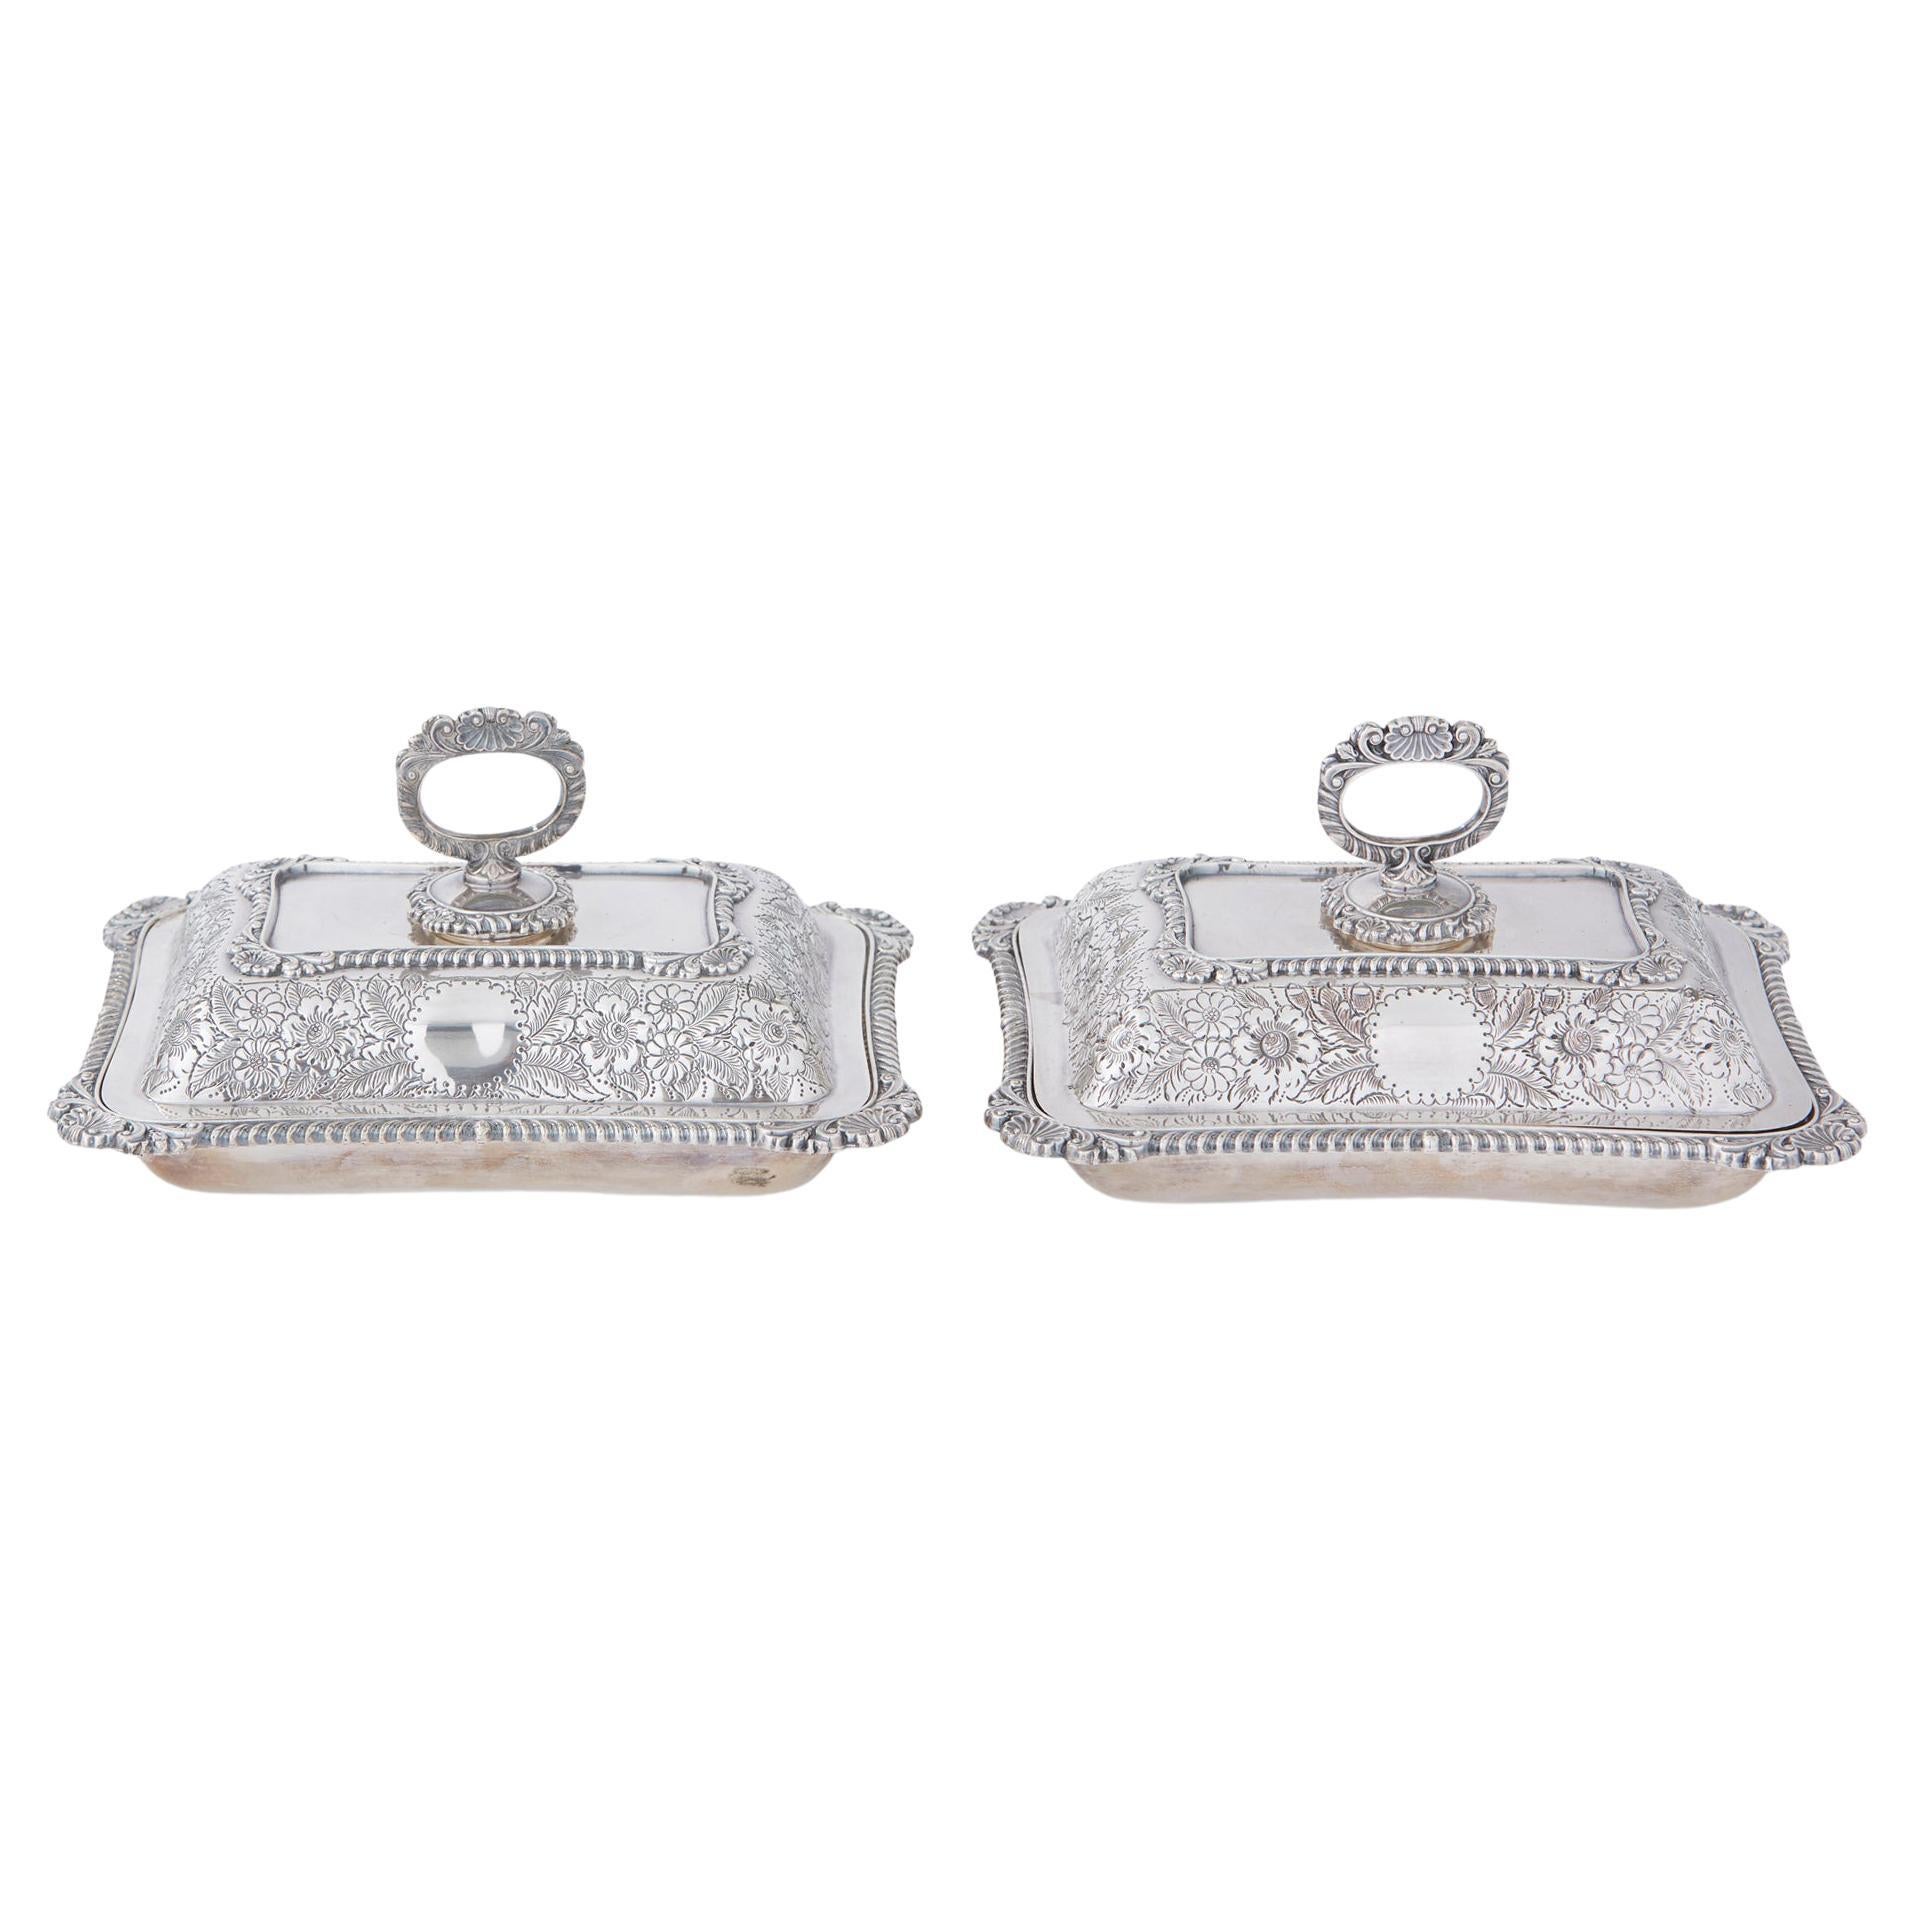 English Silver Plate Covered Pair Entree Dishes 